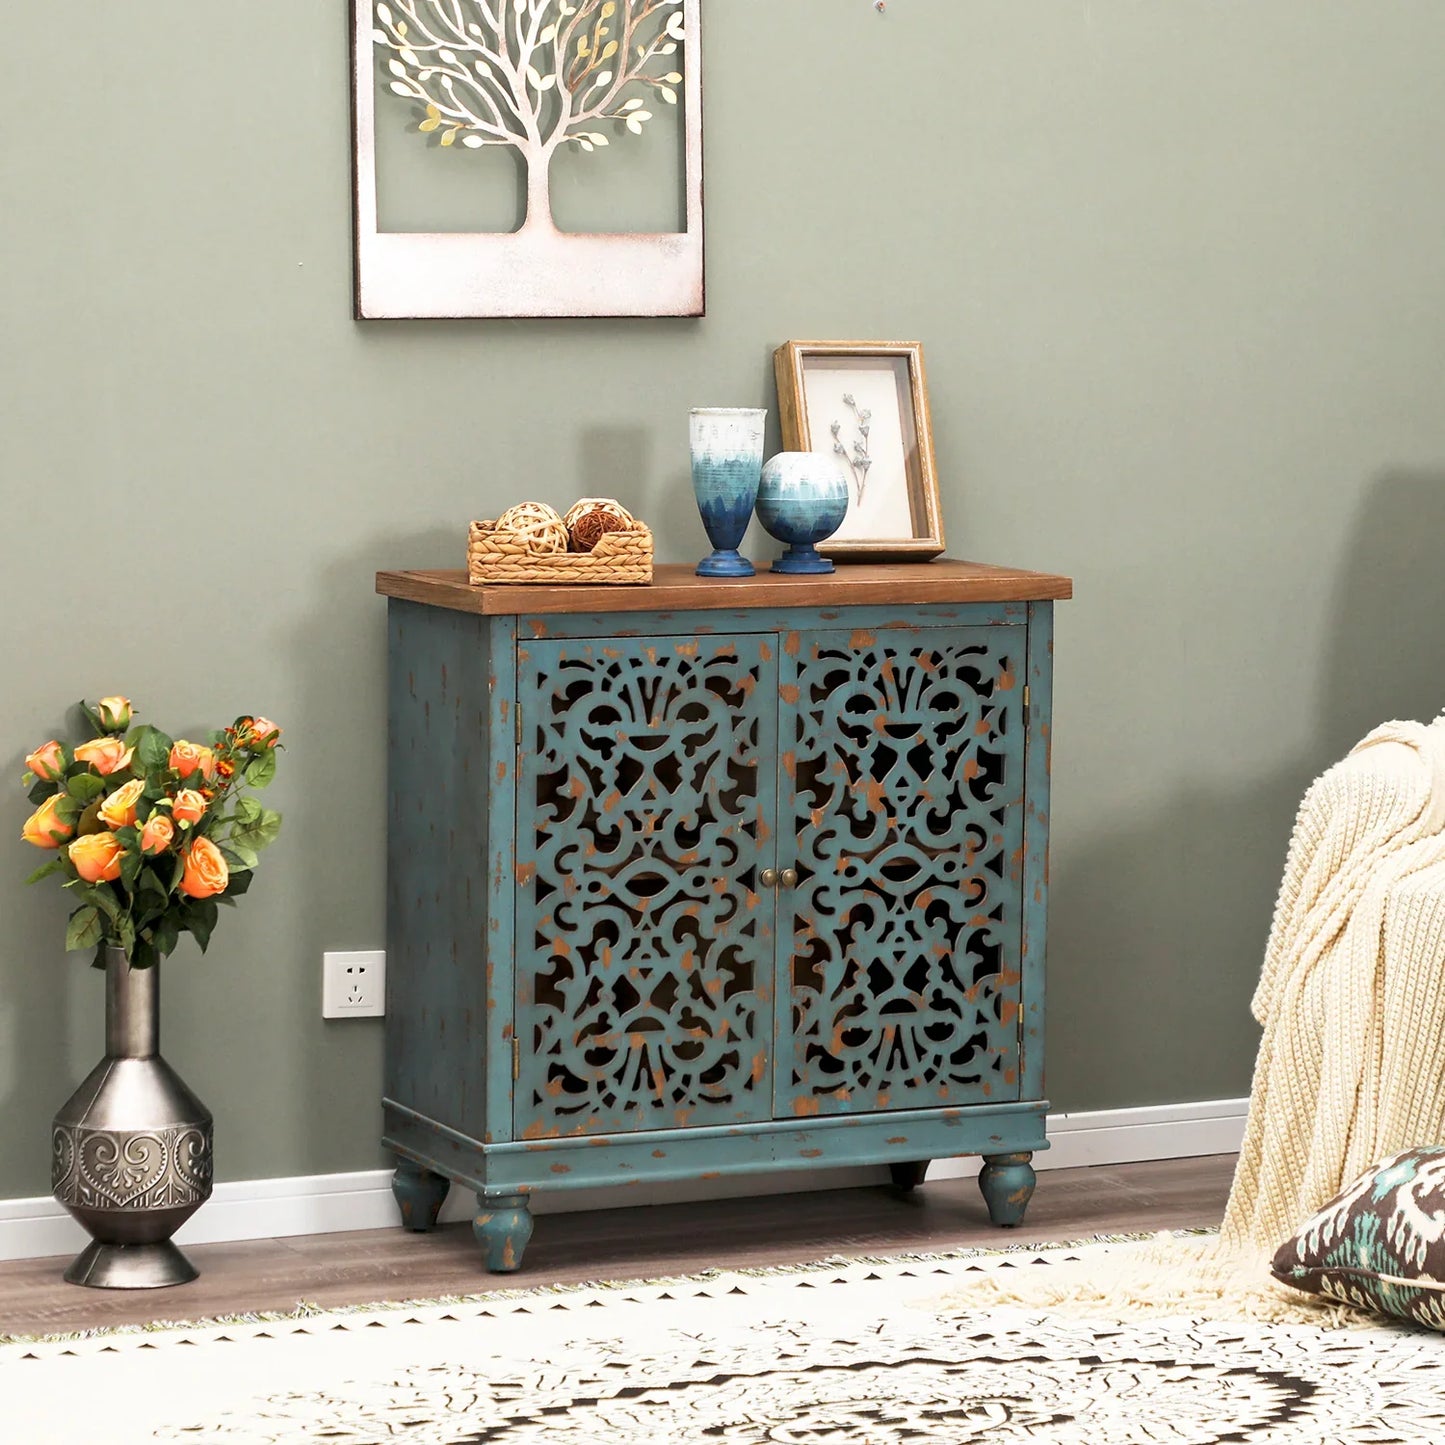 Alpha Joy 2-Door Hollow Carving Accent Cabinet for Dining Room, Living Room,Hallway-Blue